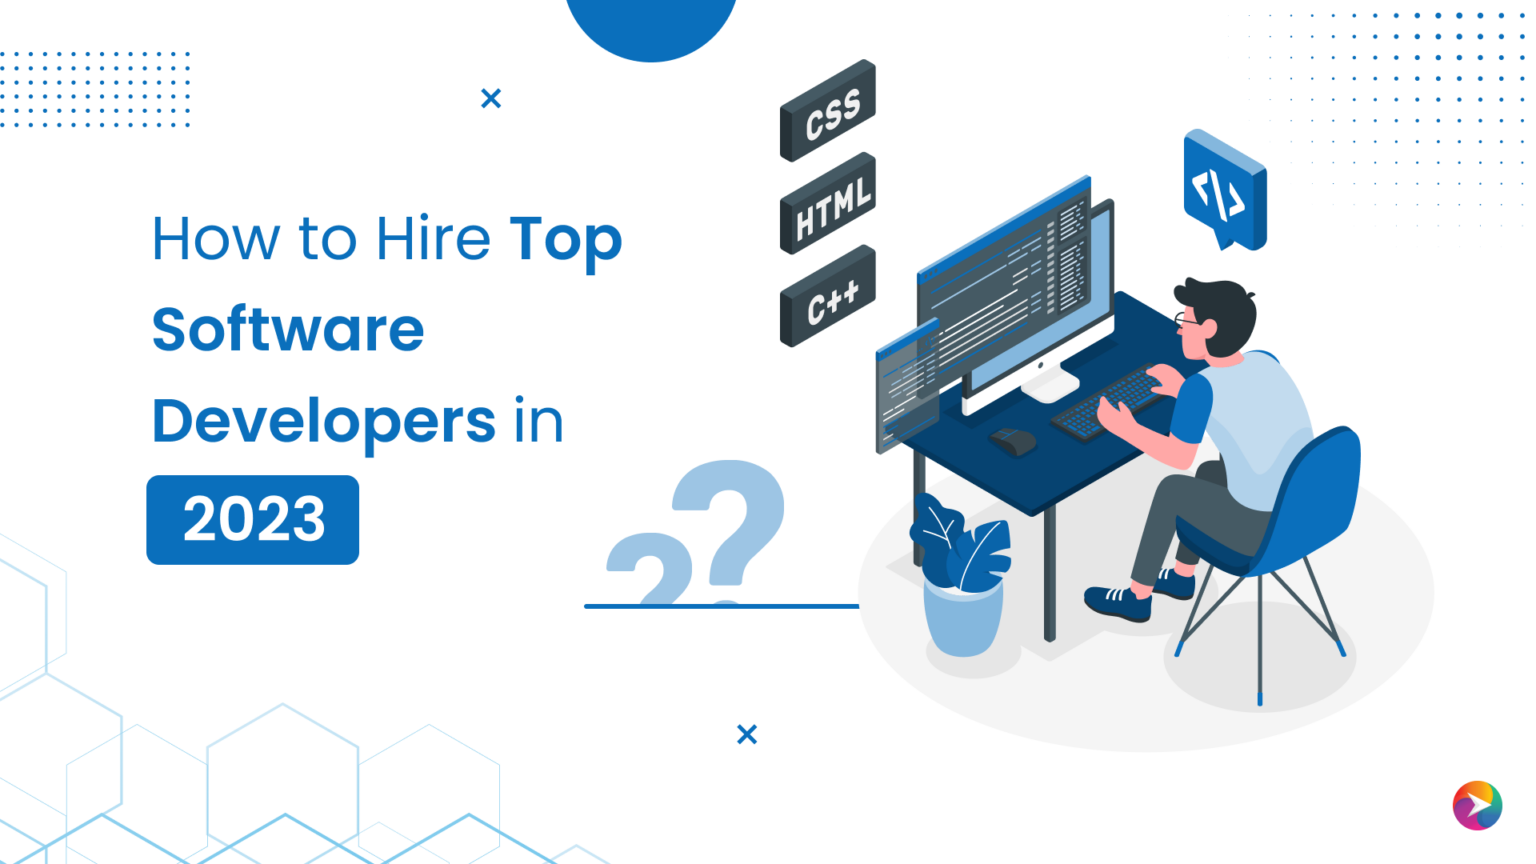 How to Hire Top Software Developers in 2023